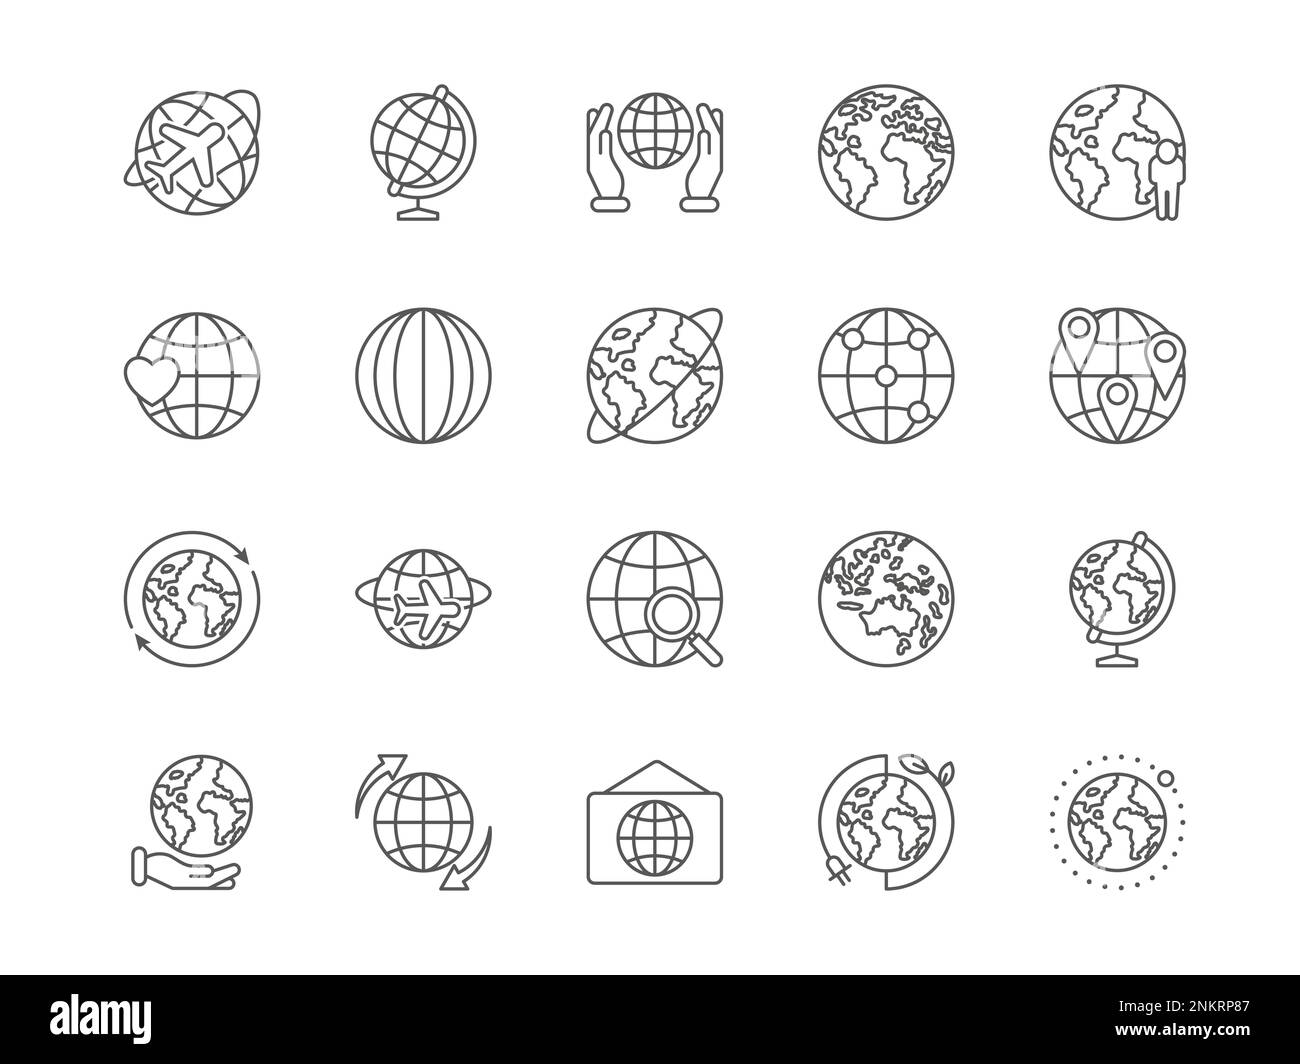 World globe. Planet icons. Earth in hands. Global international map. Europe country. Continents and ocean. Business travel signs. Geography and cartog Stock Vector